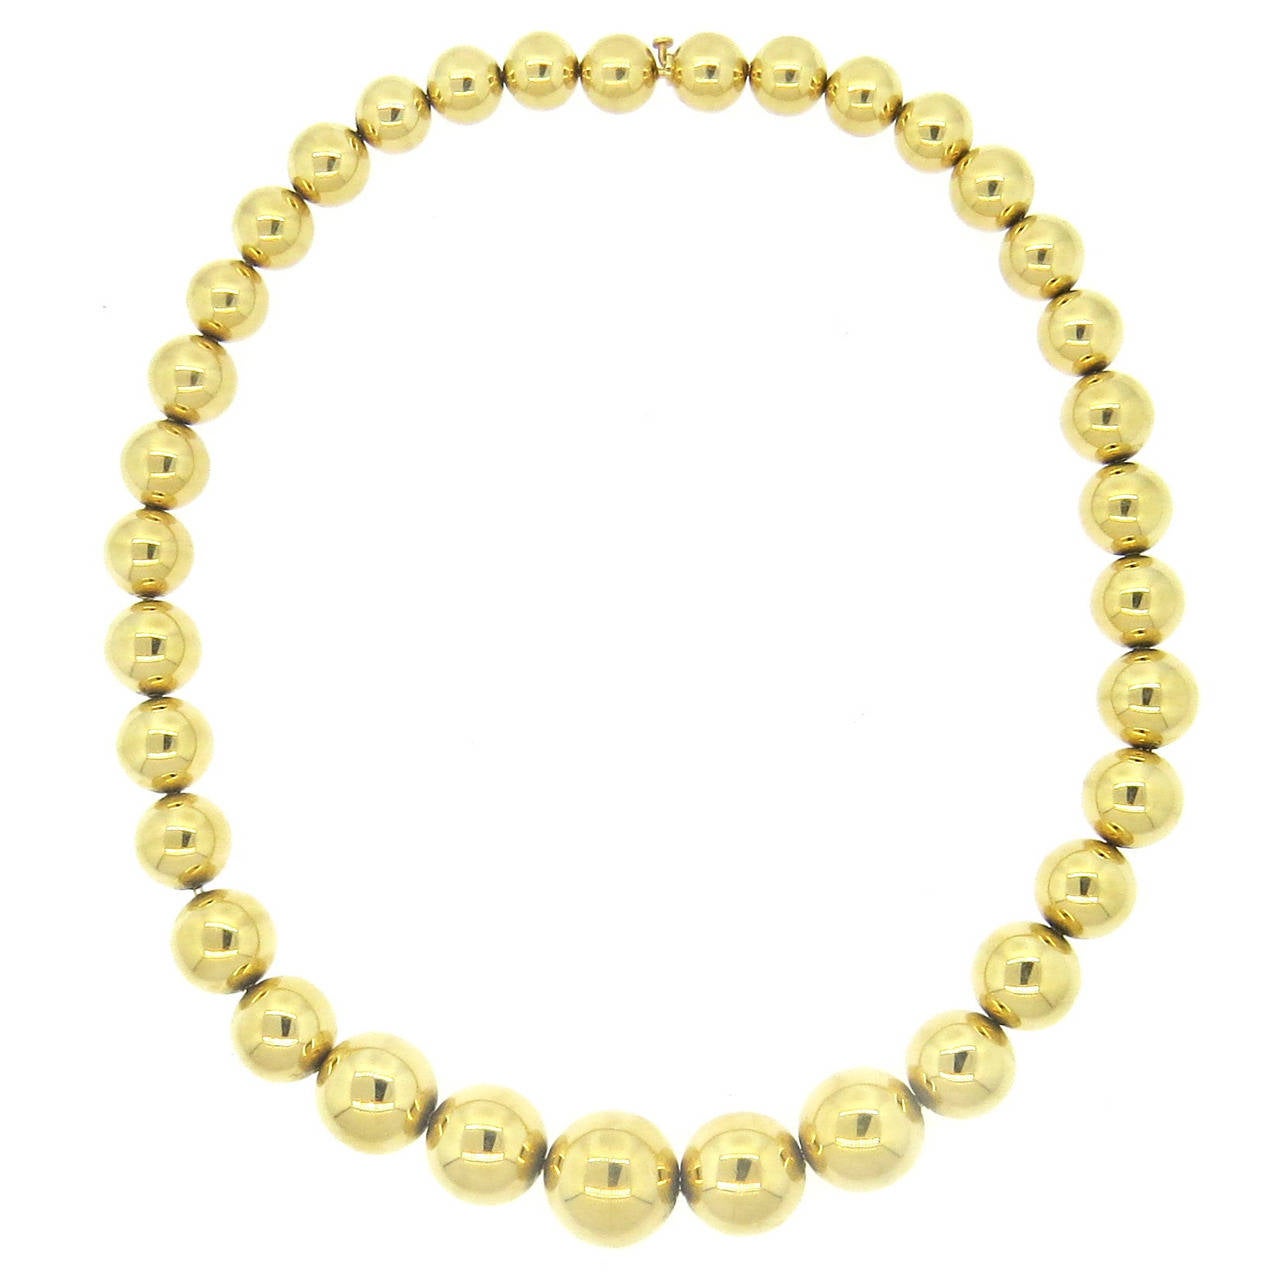 Antique Gold Ball Bead Necklace